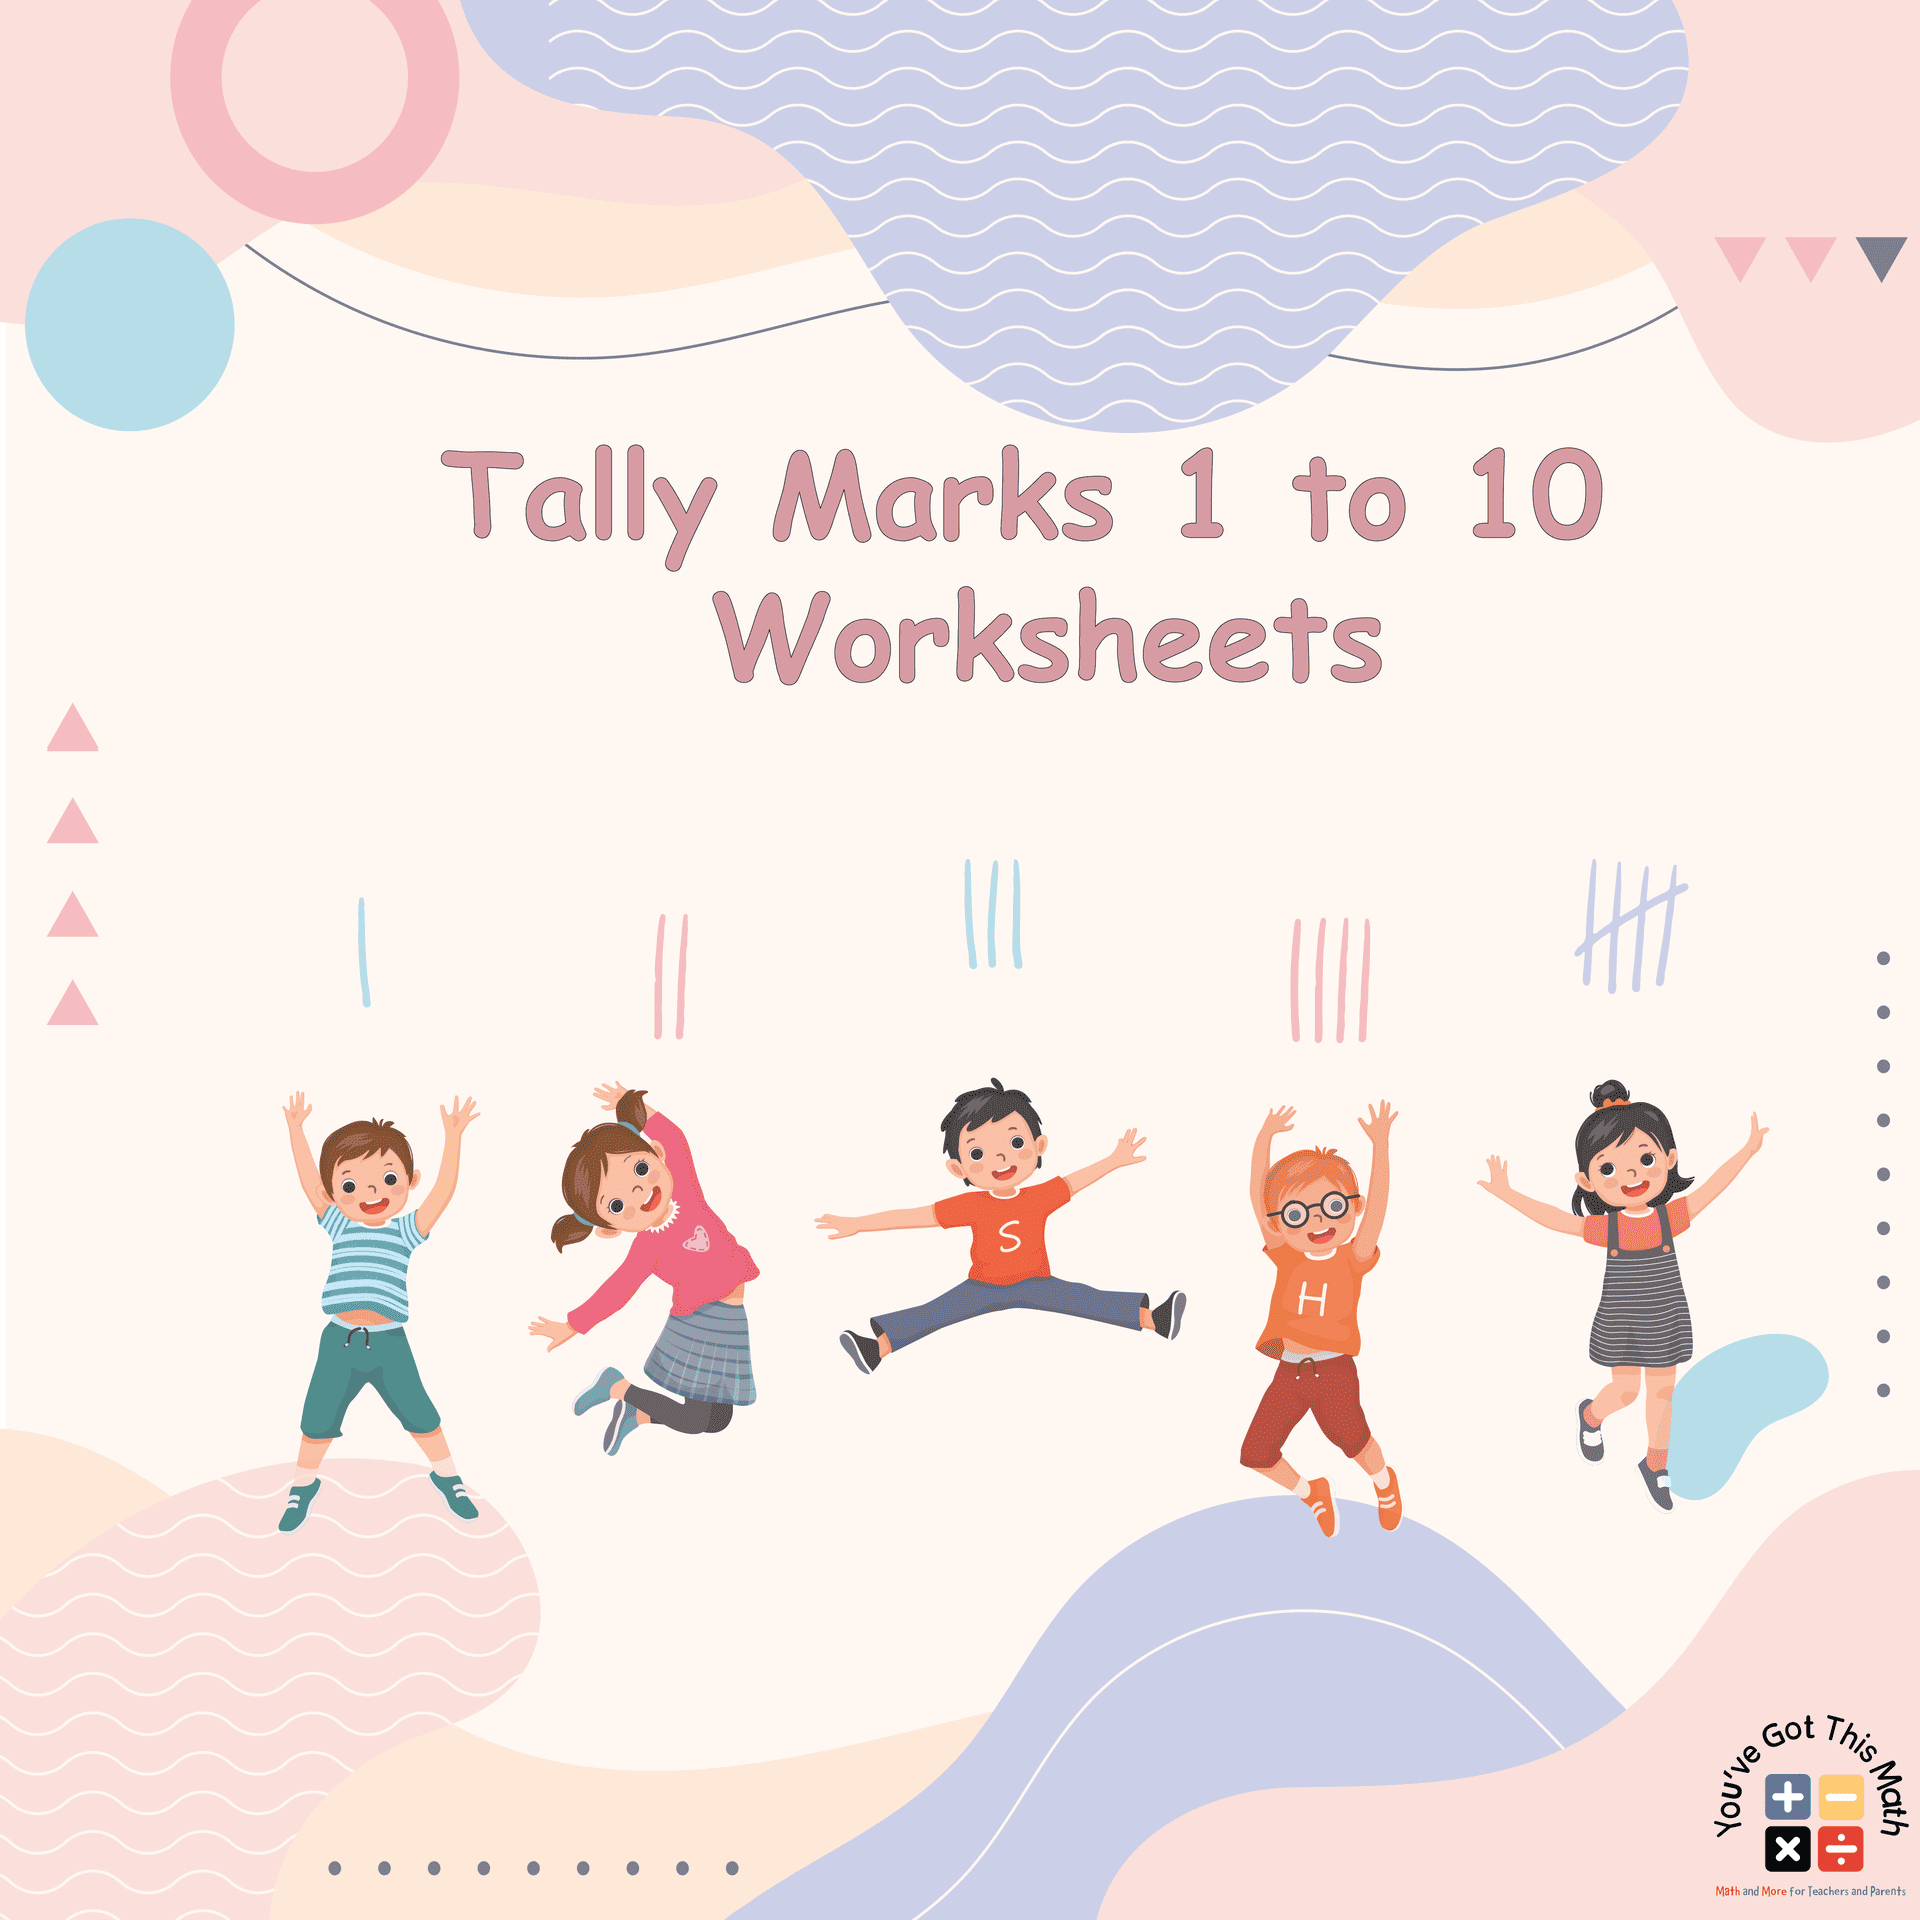 8 Free Tally Marks 1 to 10 Worksheets | Fun Activities